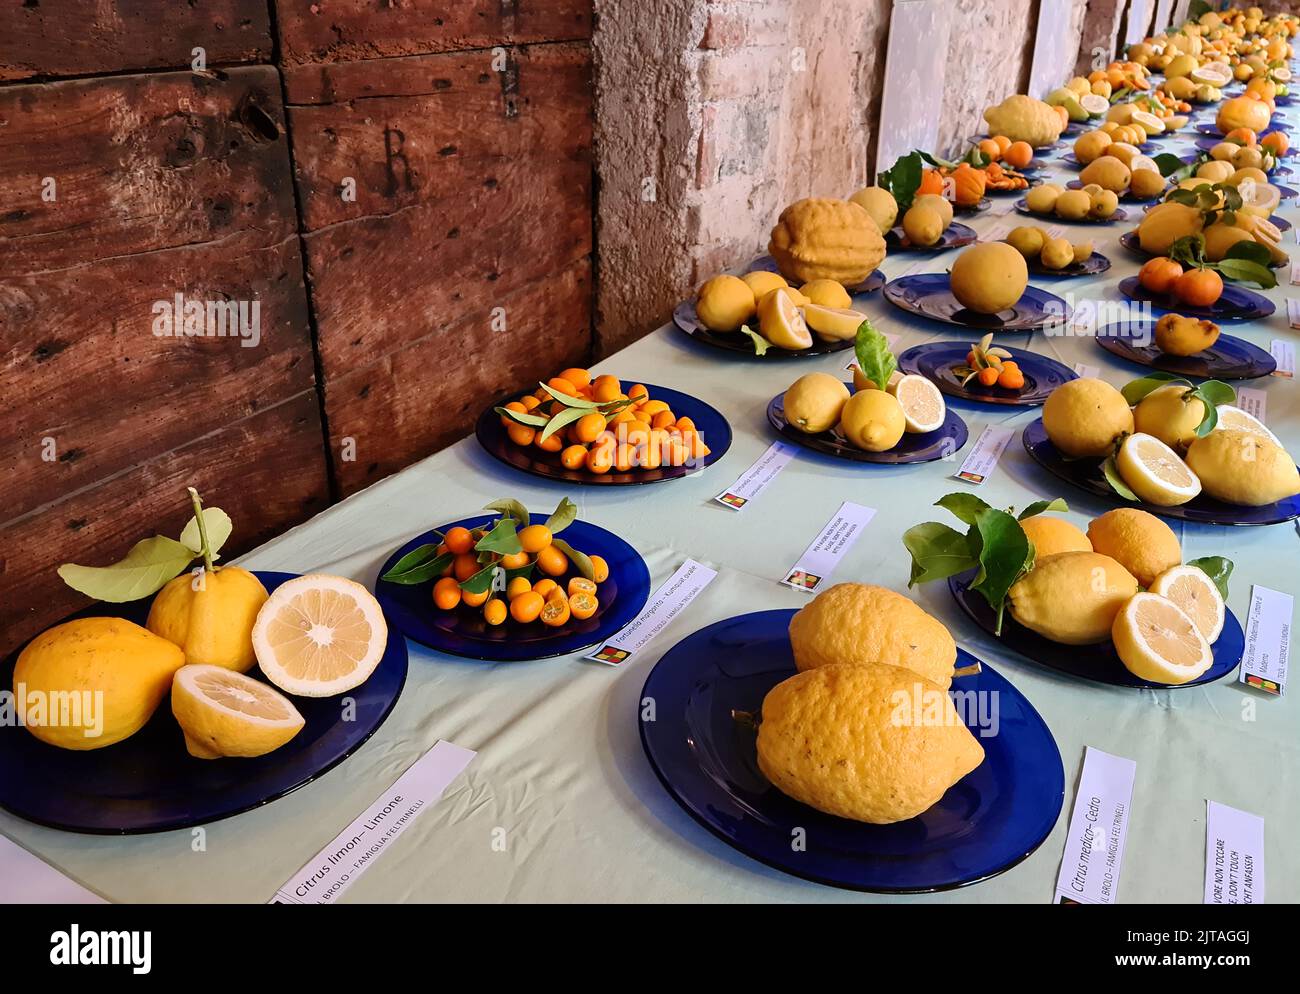 Giardini d’Agrumi is an event with a pomological table of Garda citrus fruits, an exhibition of historical tools, exhibitions, floral arrangements. Stock Photo